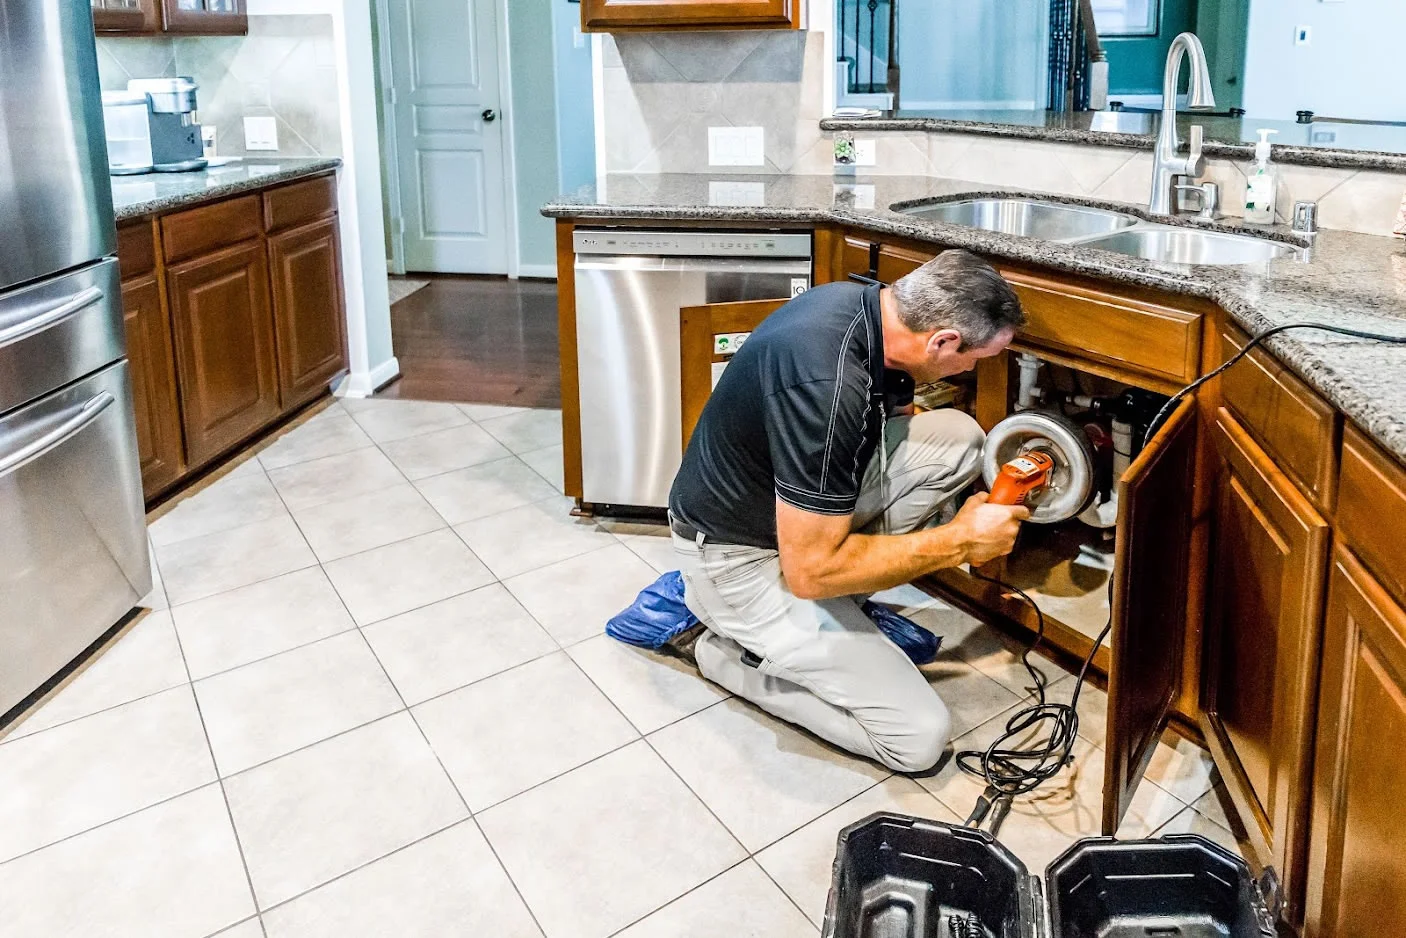 Drain Cleaning Service: Why Hair Clogs the Shower Drains